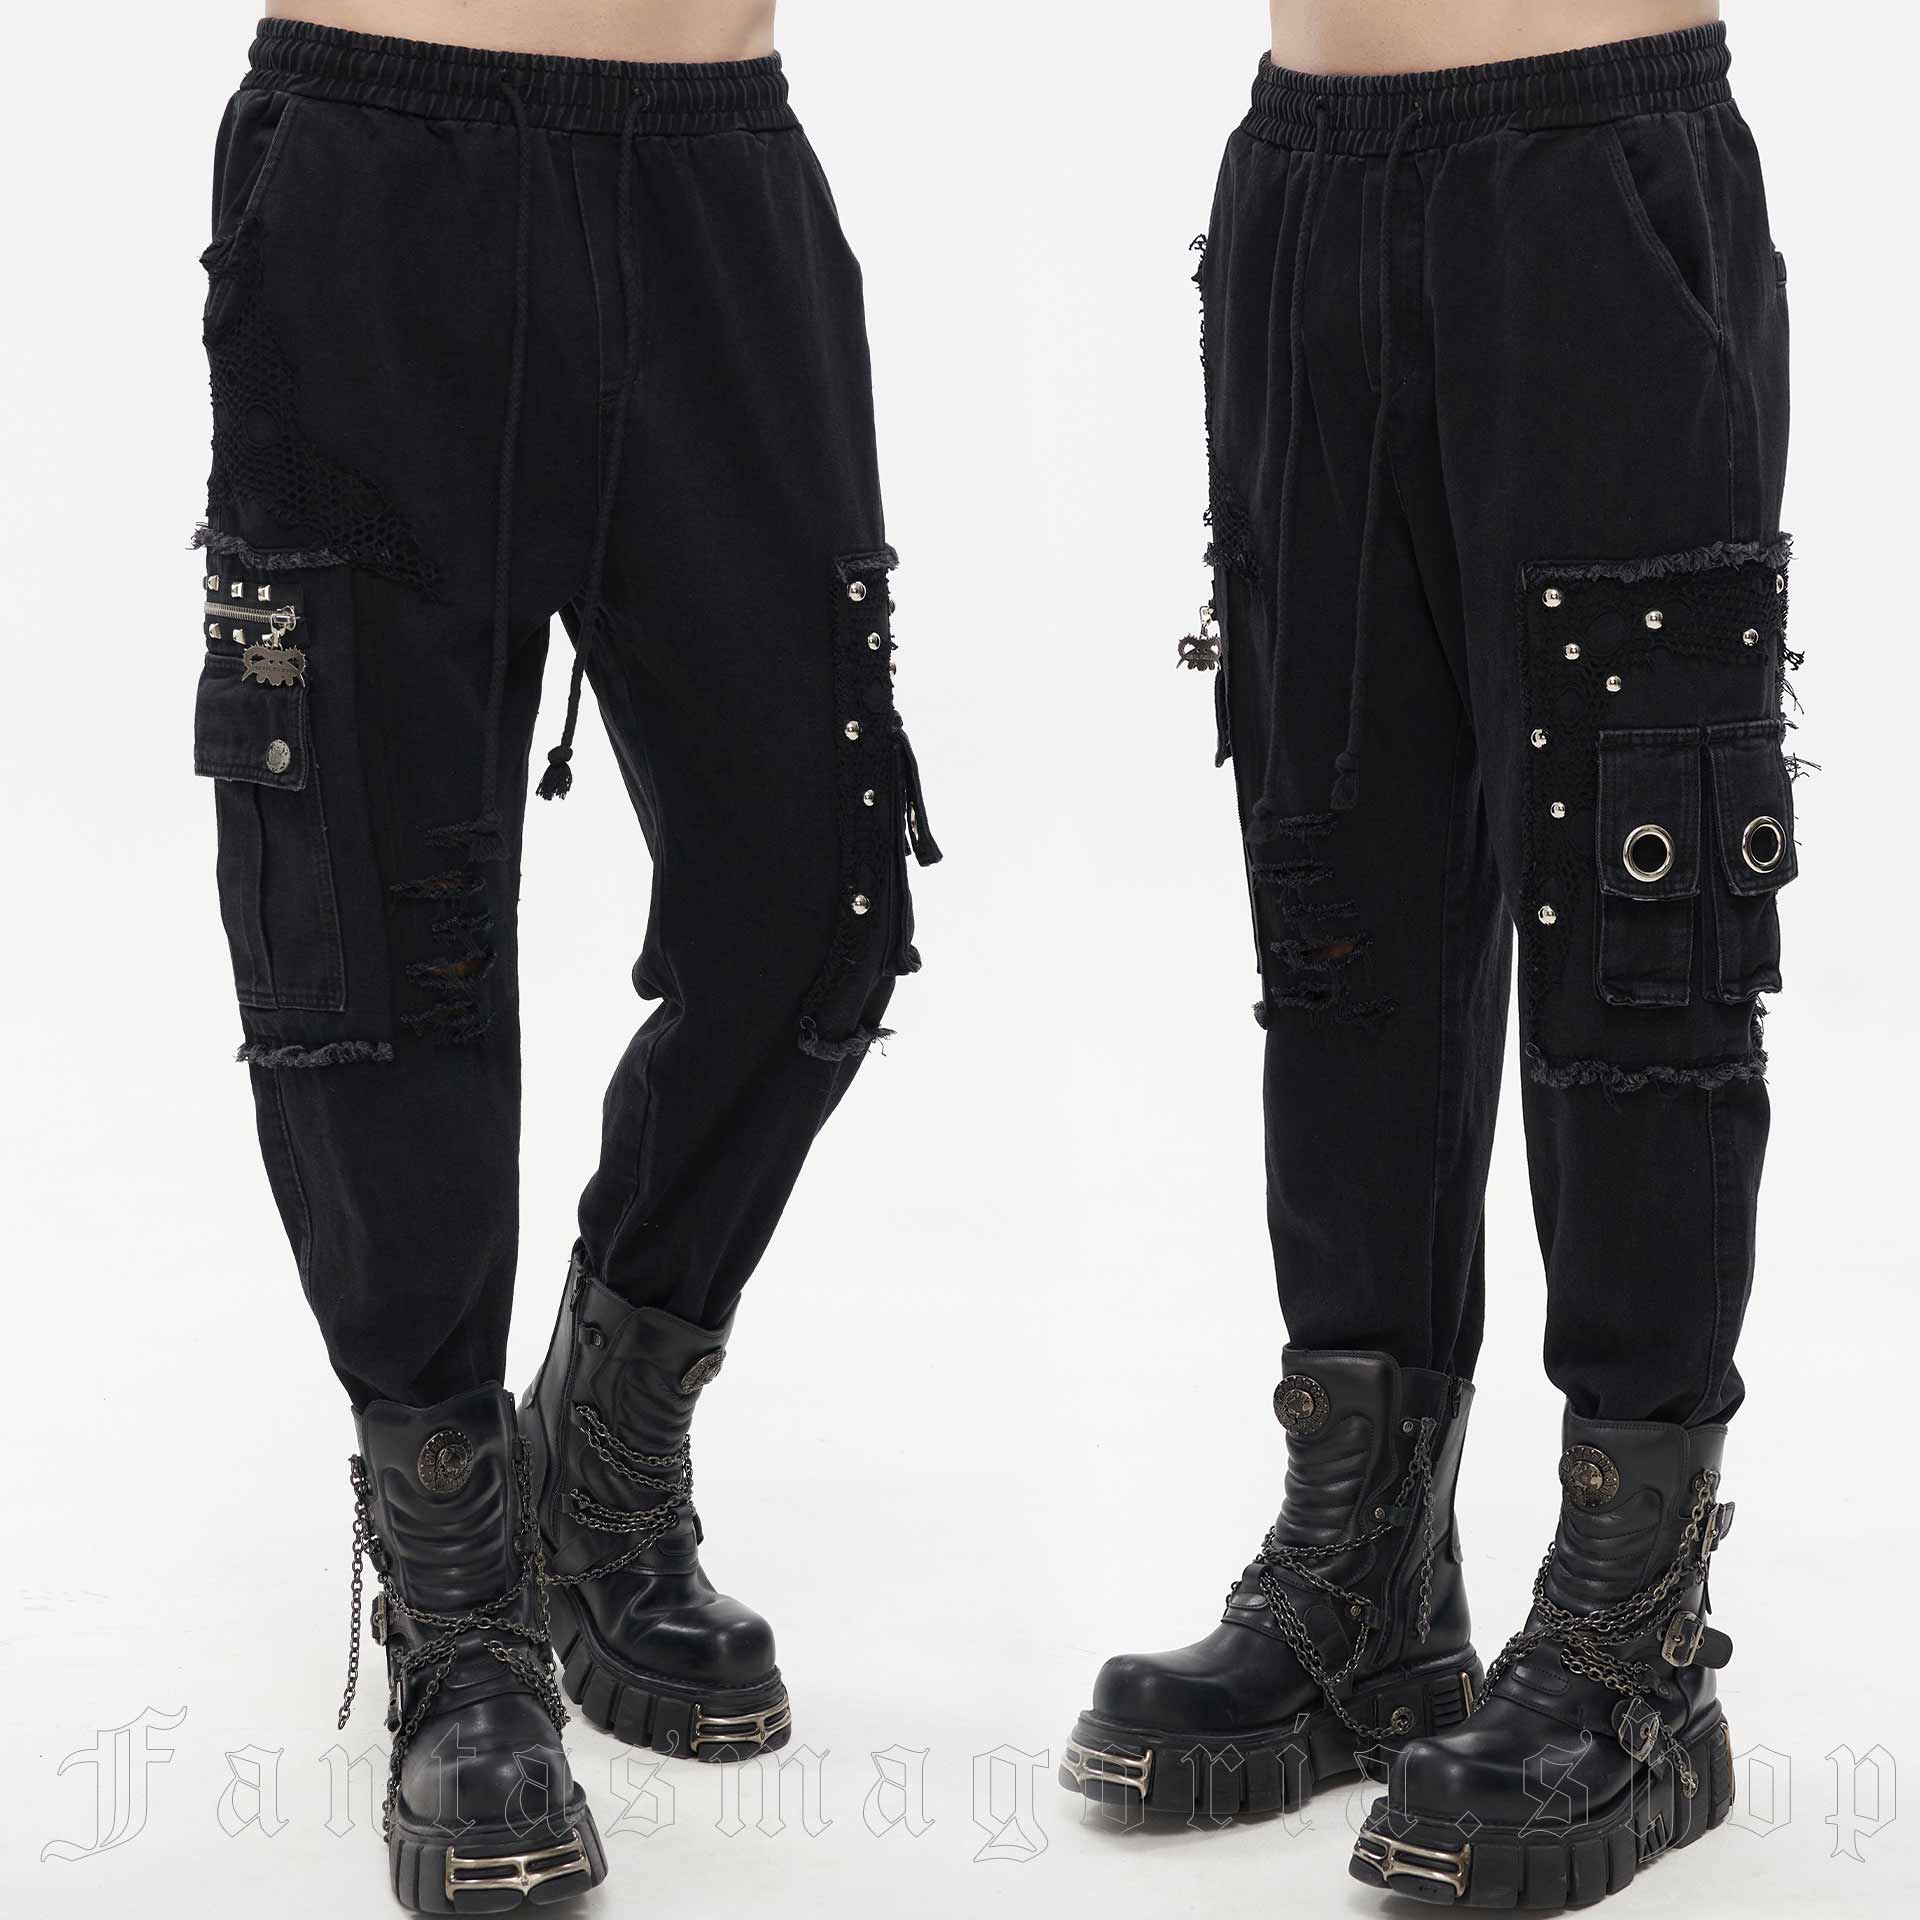 Brutalism Cargo Trousers by Devil Fashion brand